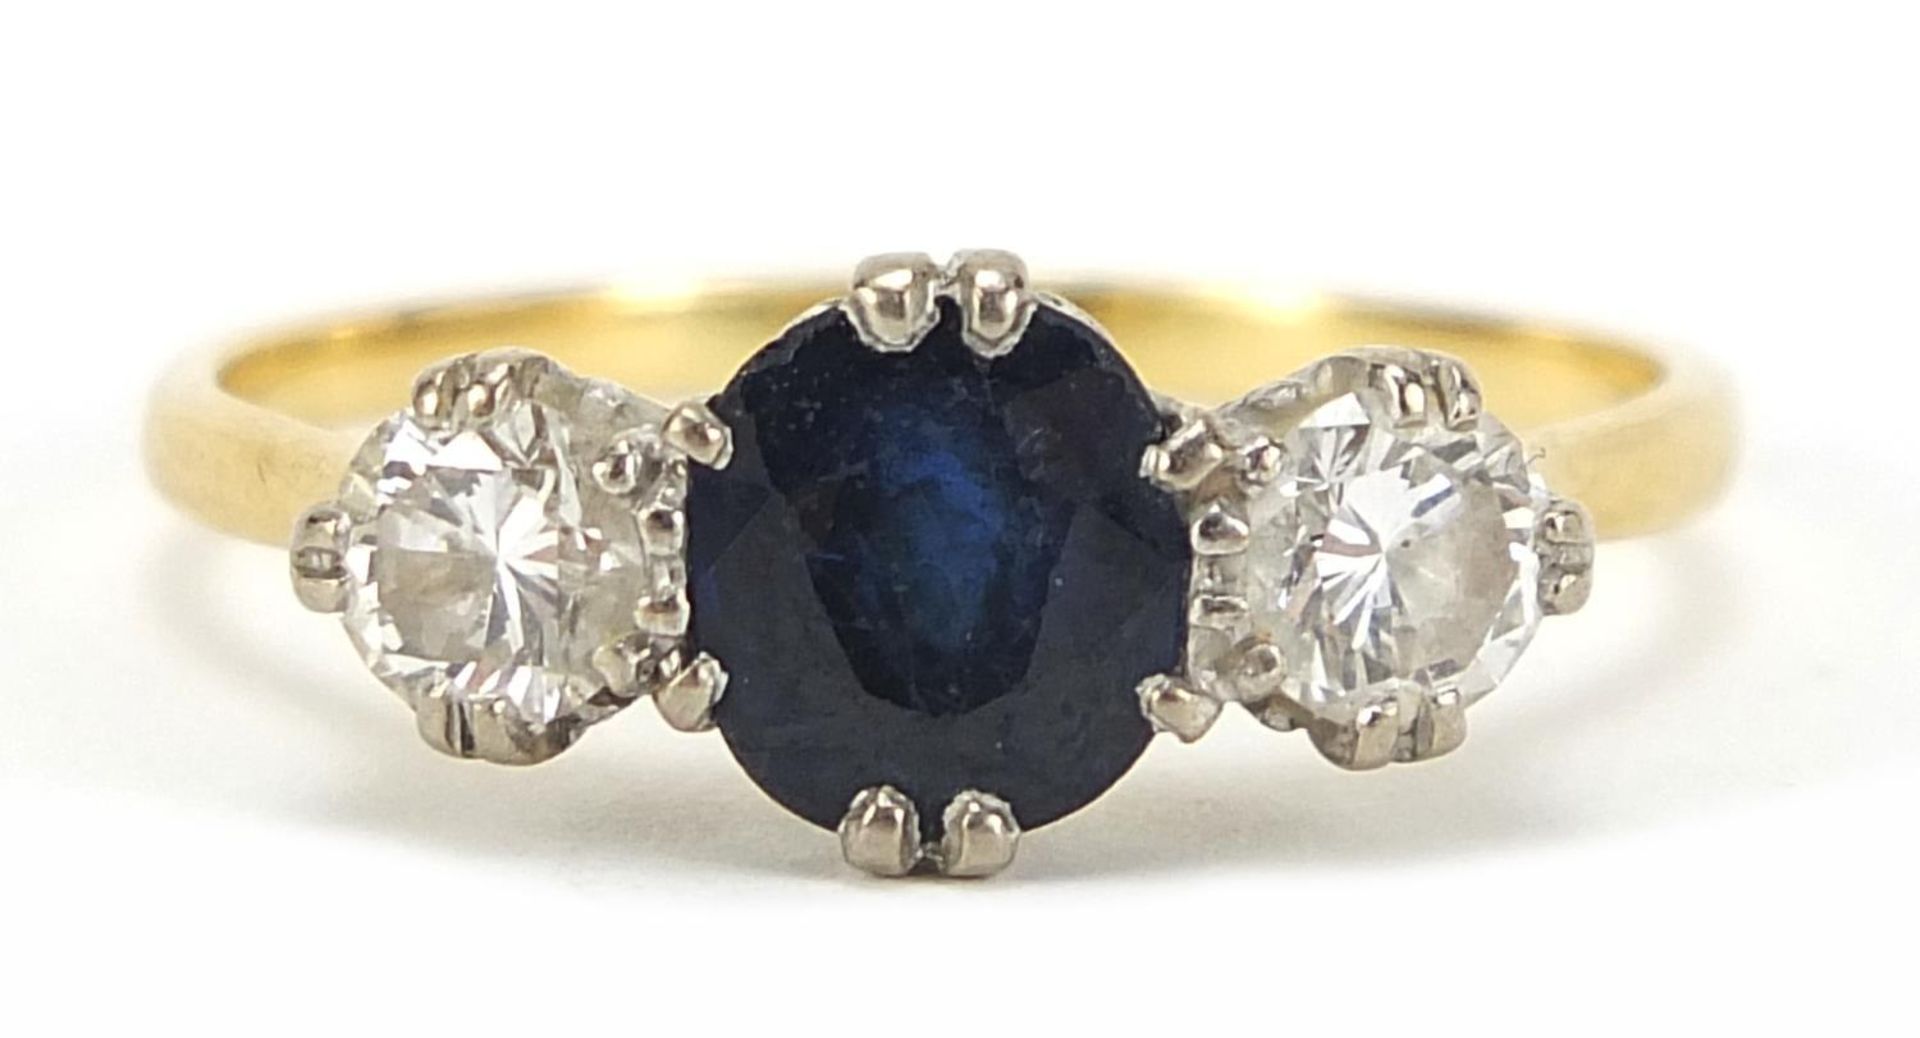 Unmarked gold, sapphire and diamond three stone ring, the sapphire approximately 7mm x 6mm, the